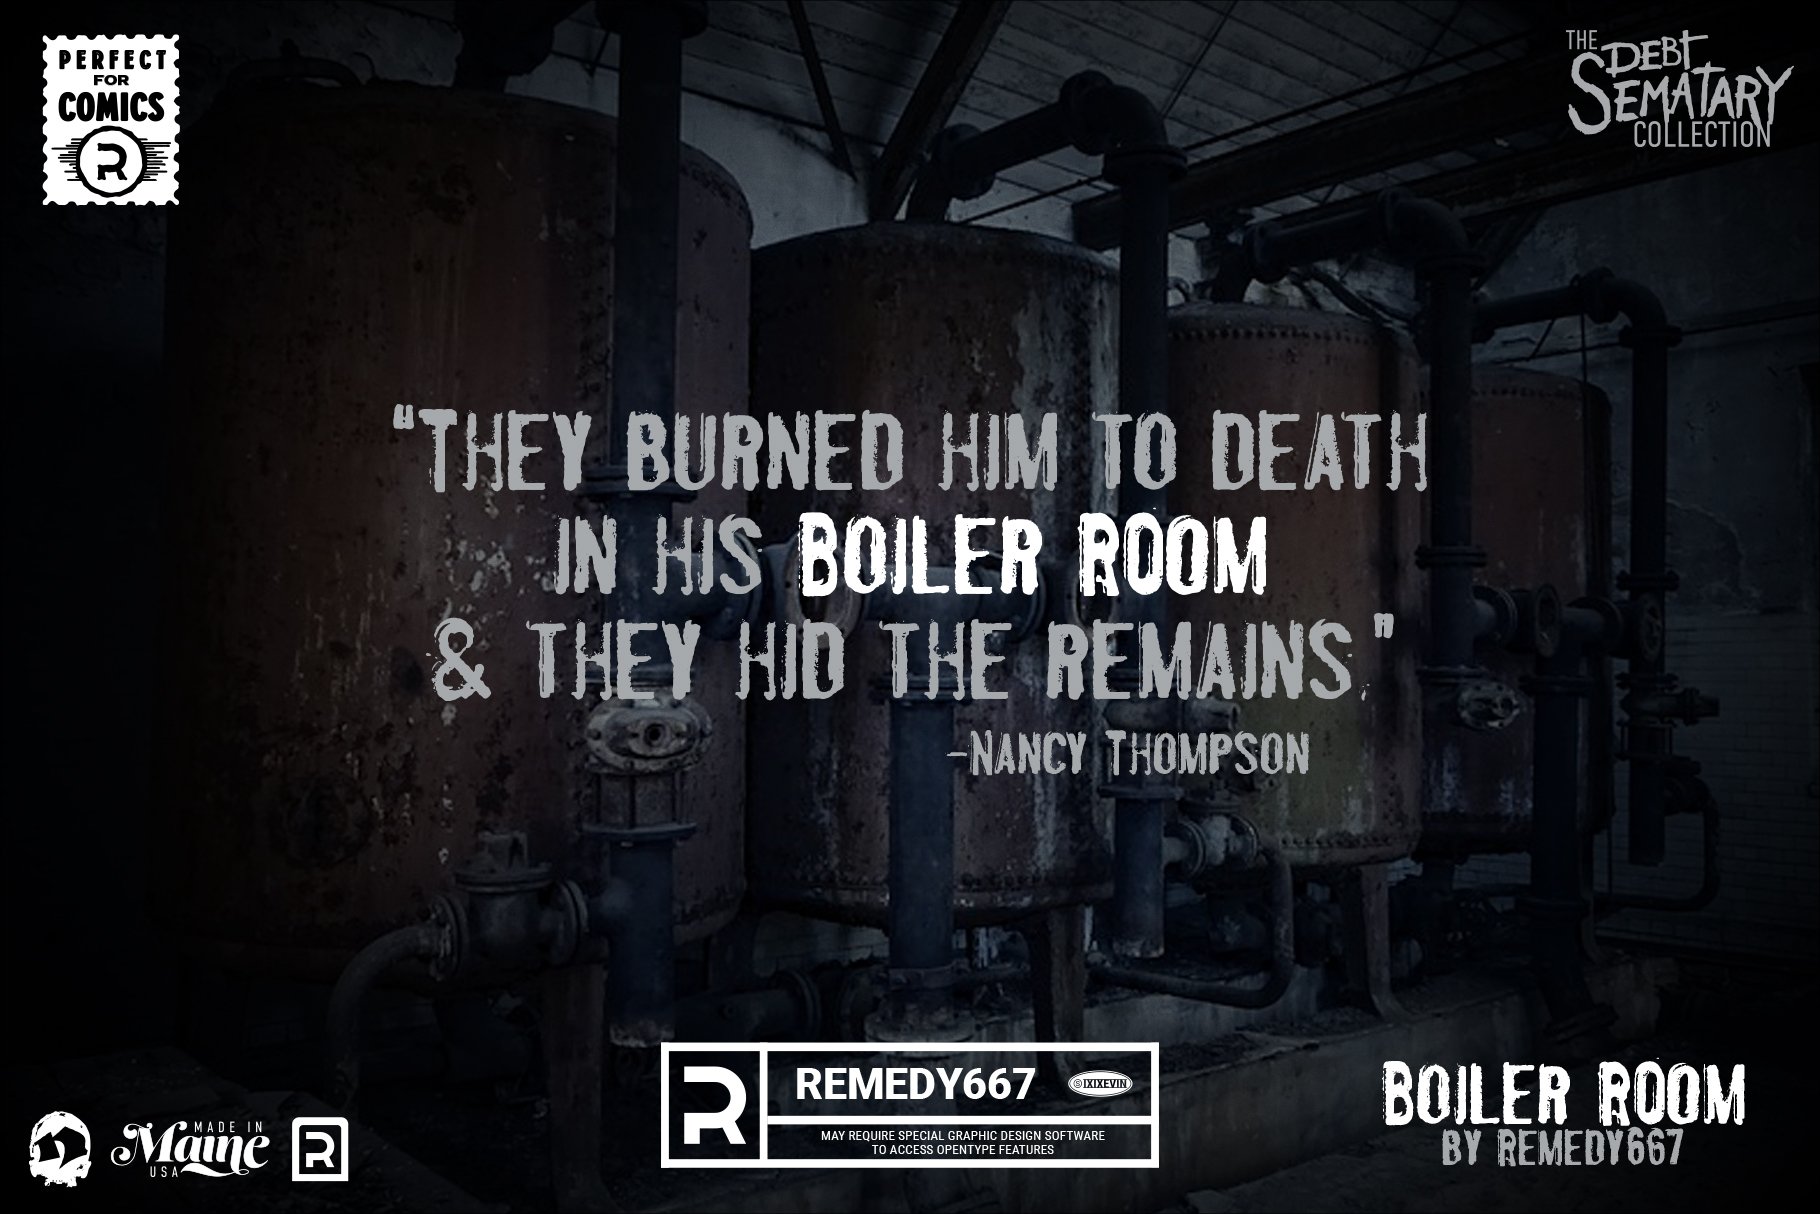 Boiler Room preview image.